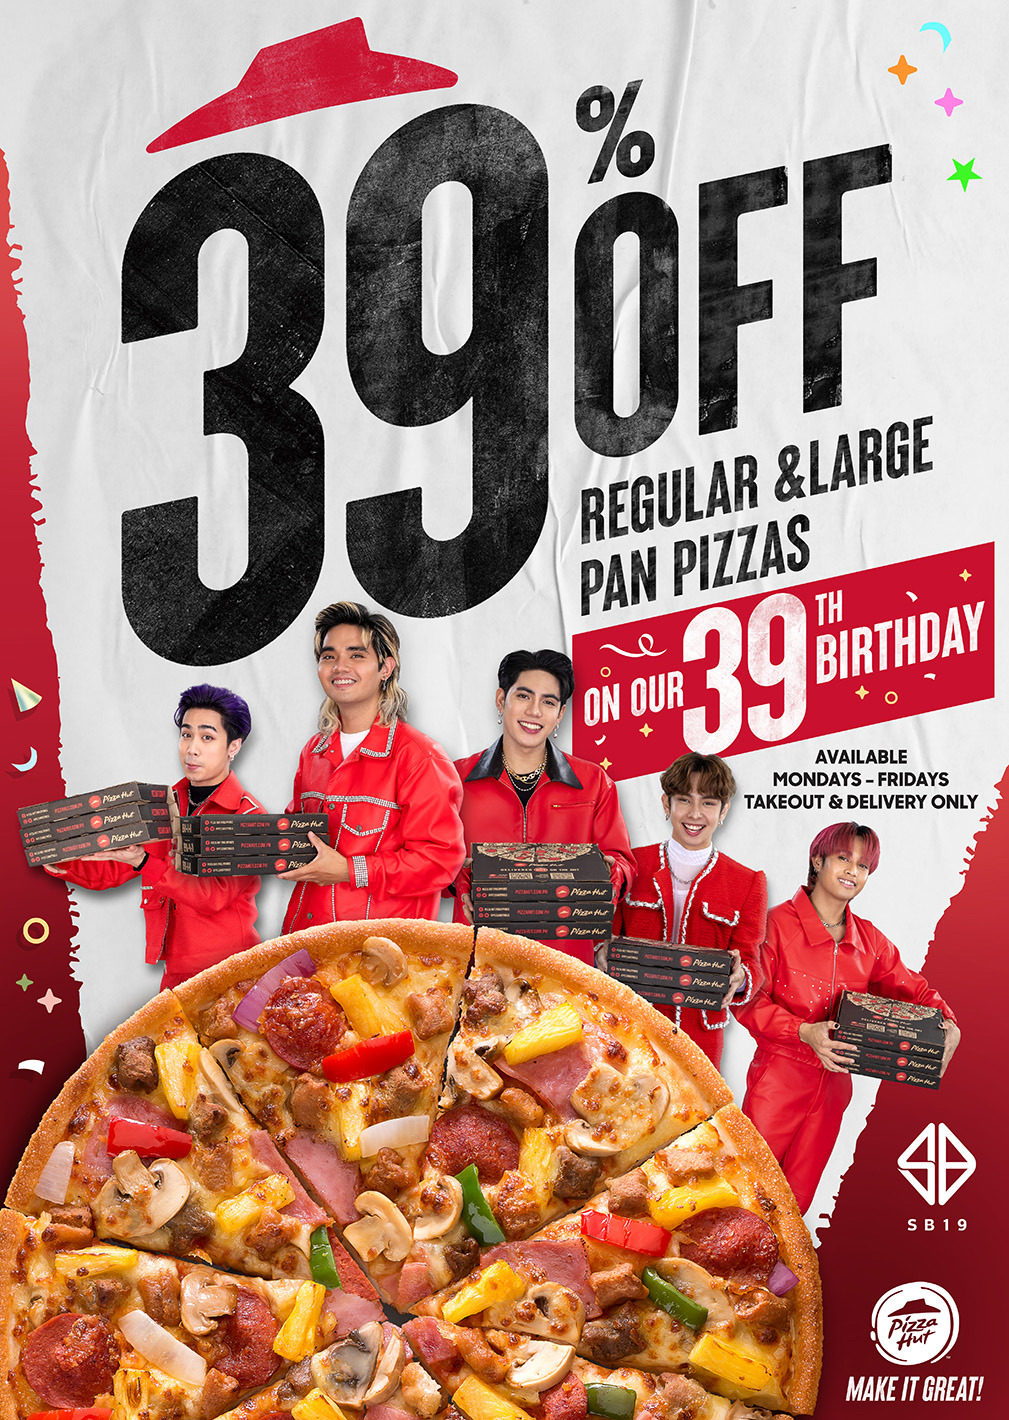 Pizza Hut PH just turned 39, so here’s 39 off on ALL regular and large Pan Pizza!